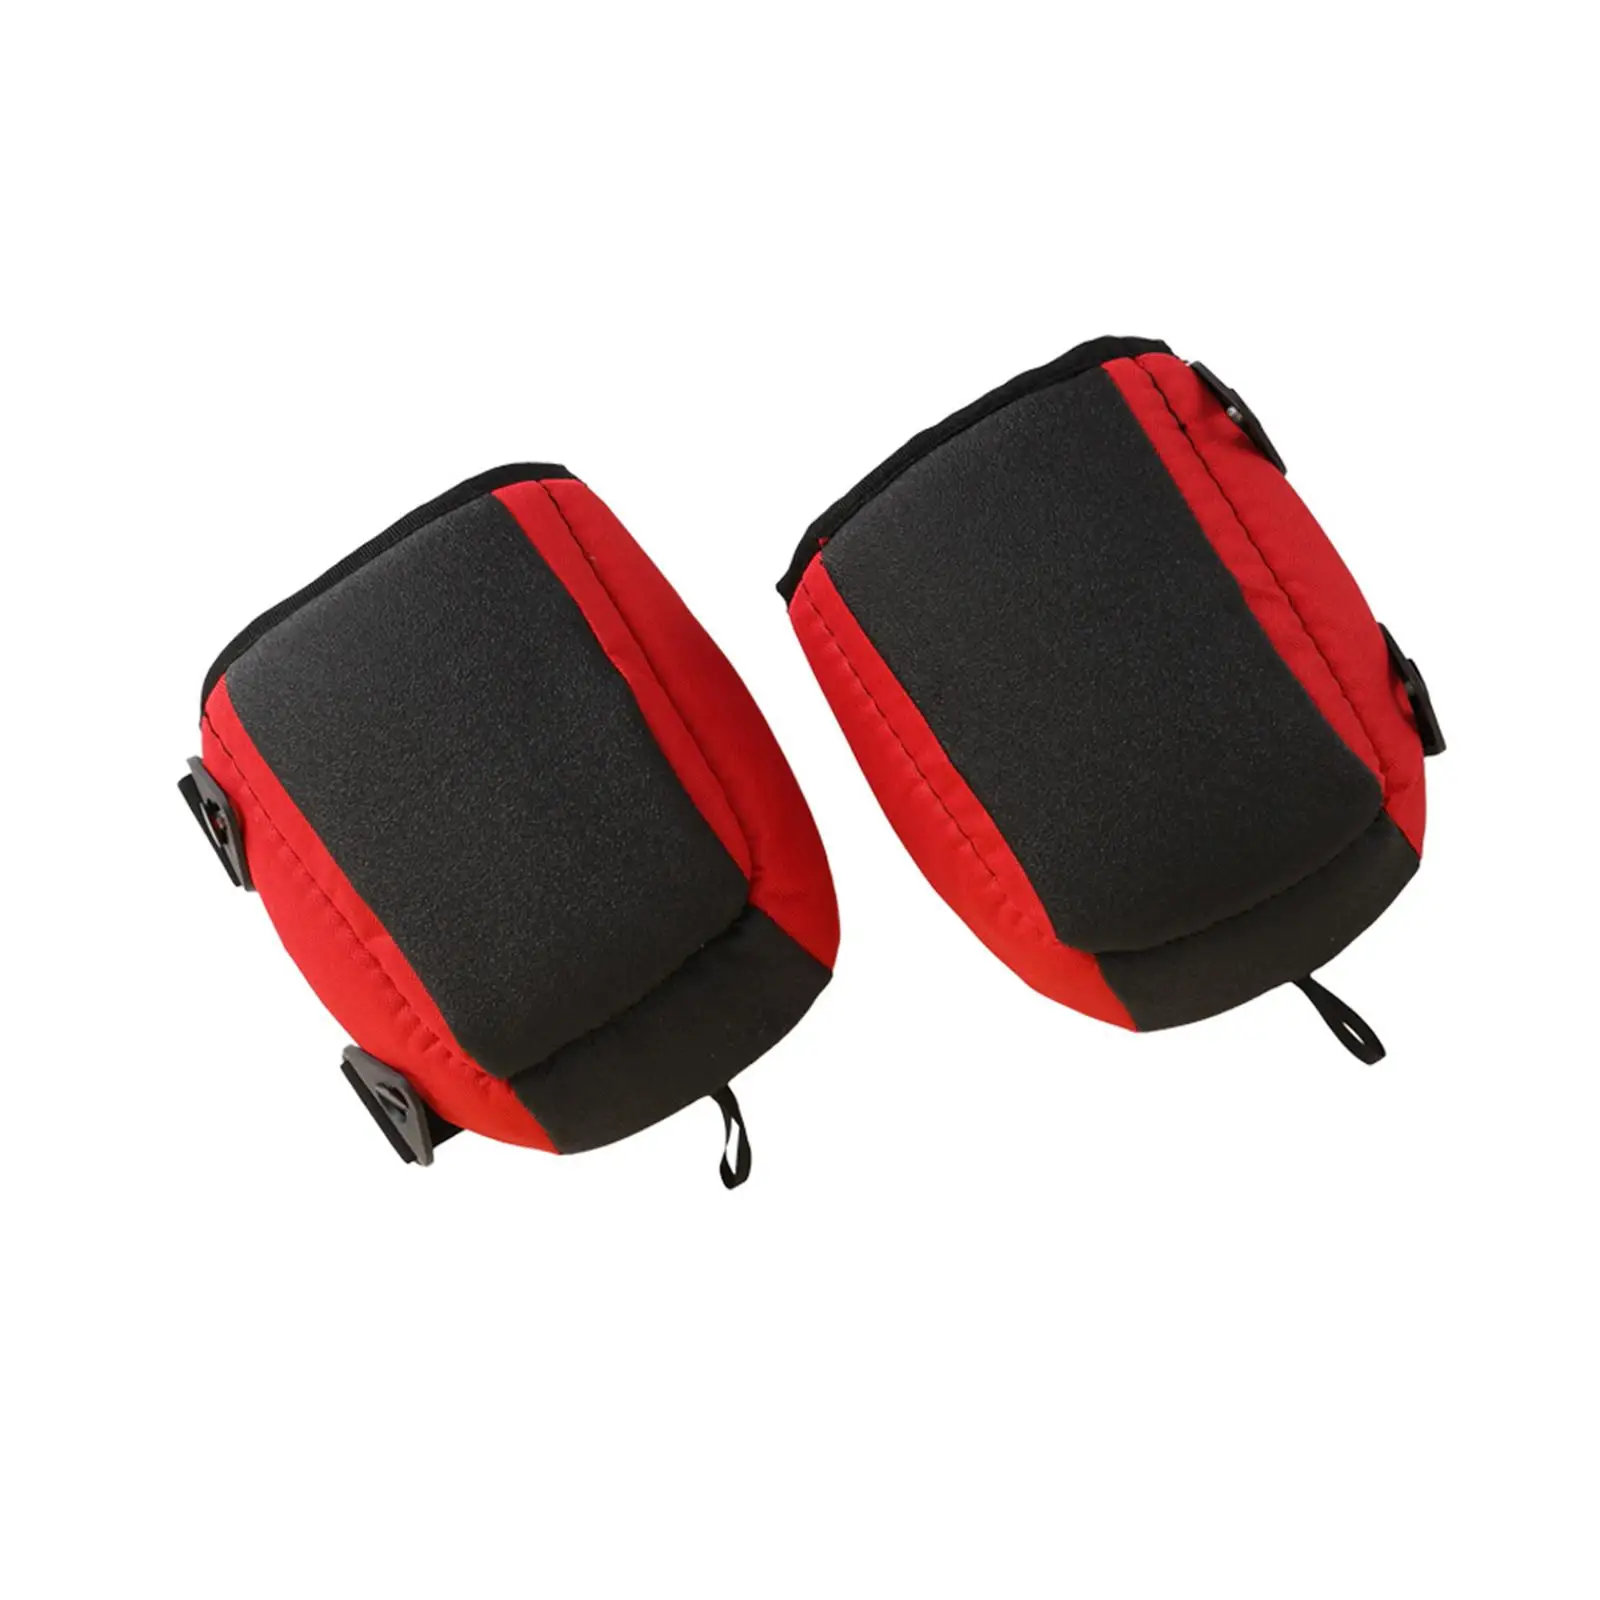 2 Pieces Knee Pads for Work Gardening for Cleaning Flooring Skiing Knee Pads